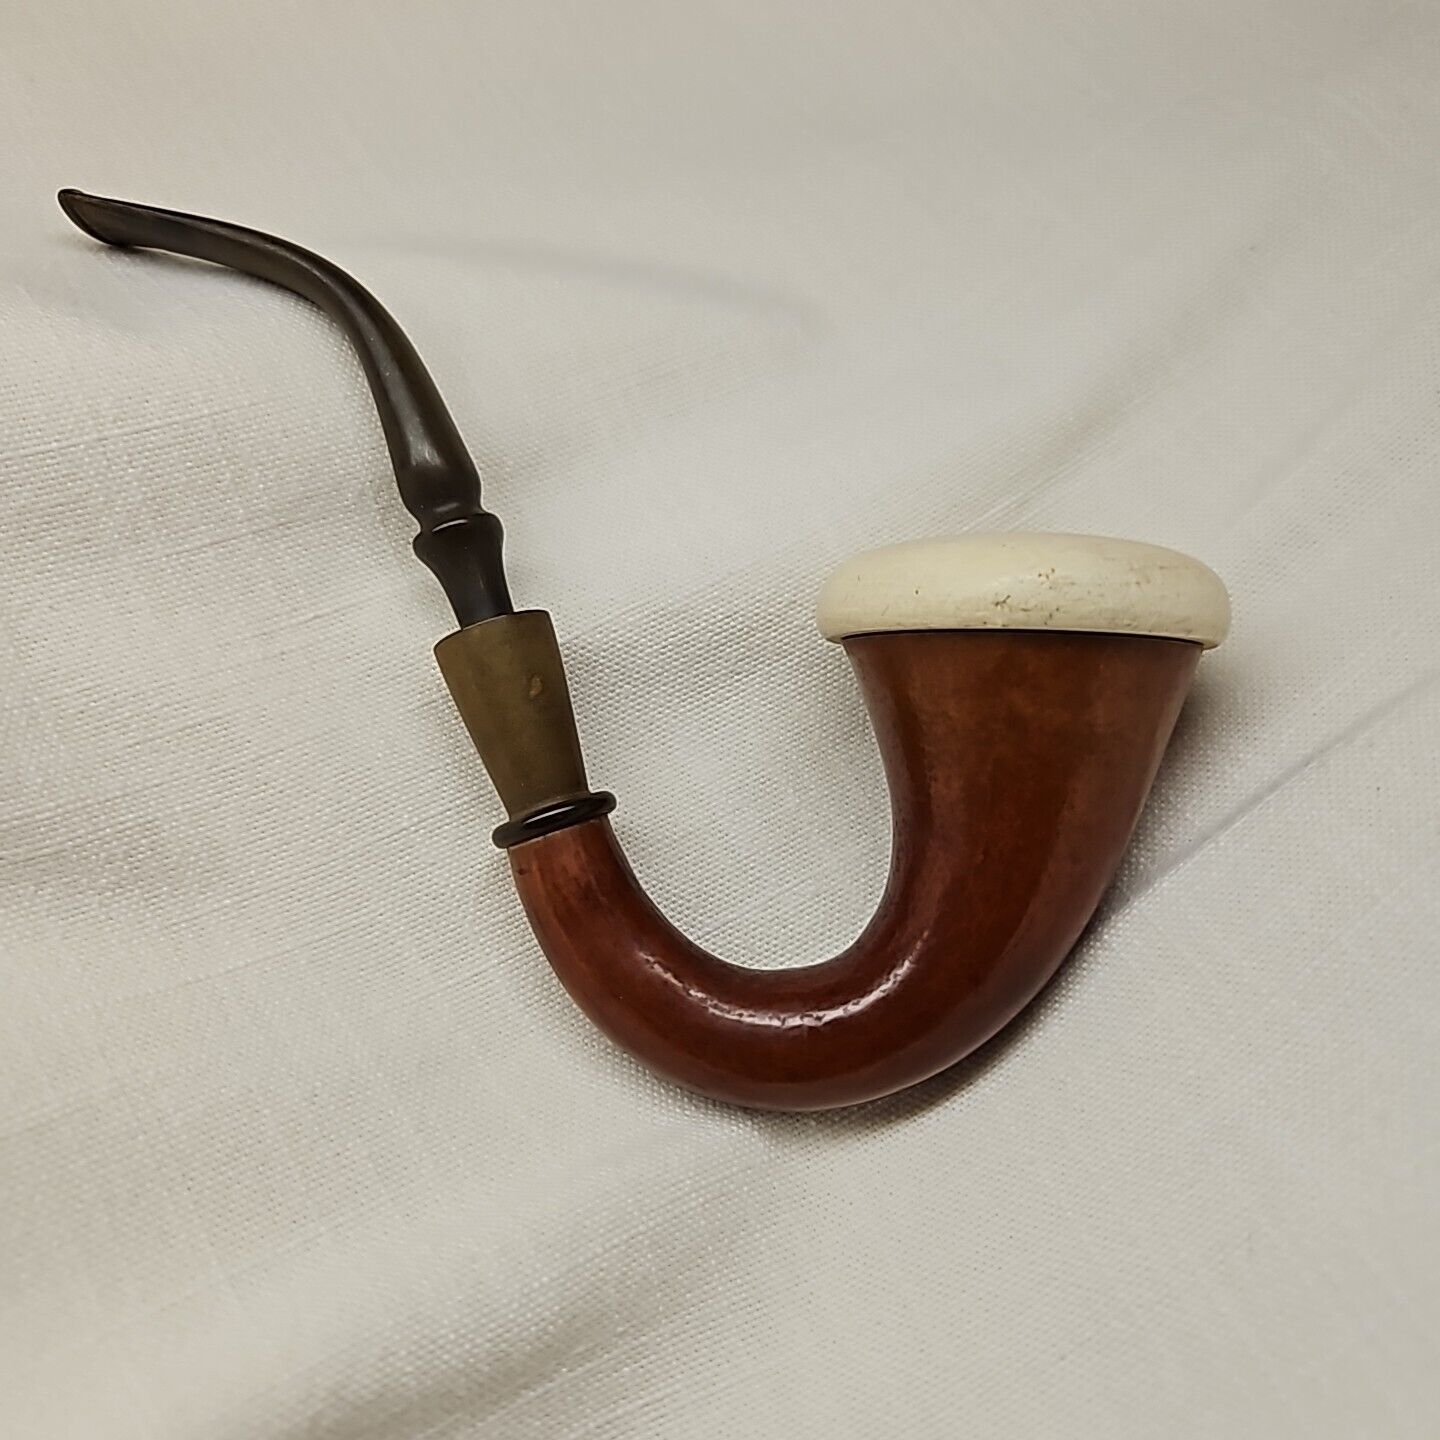 calabash pipe. Available Now for 38.00